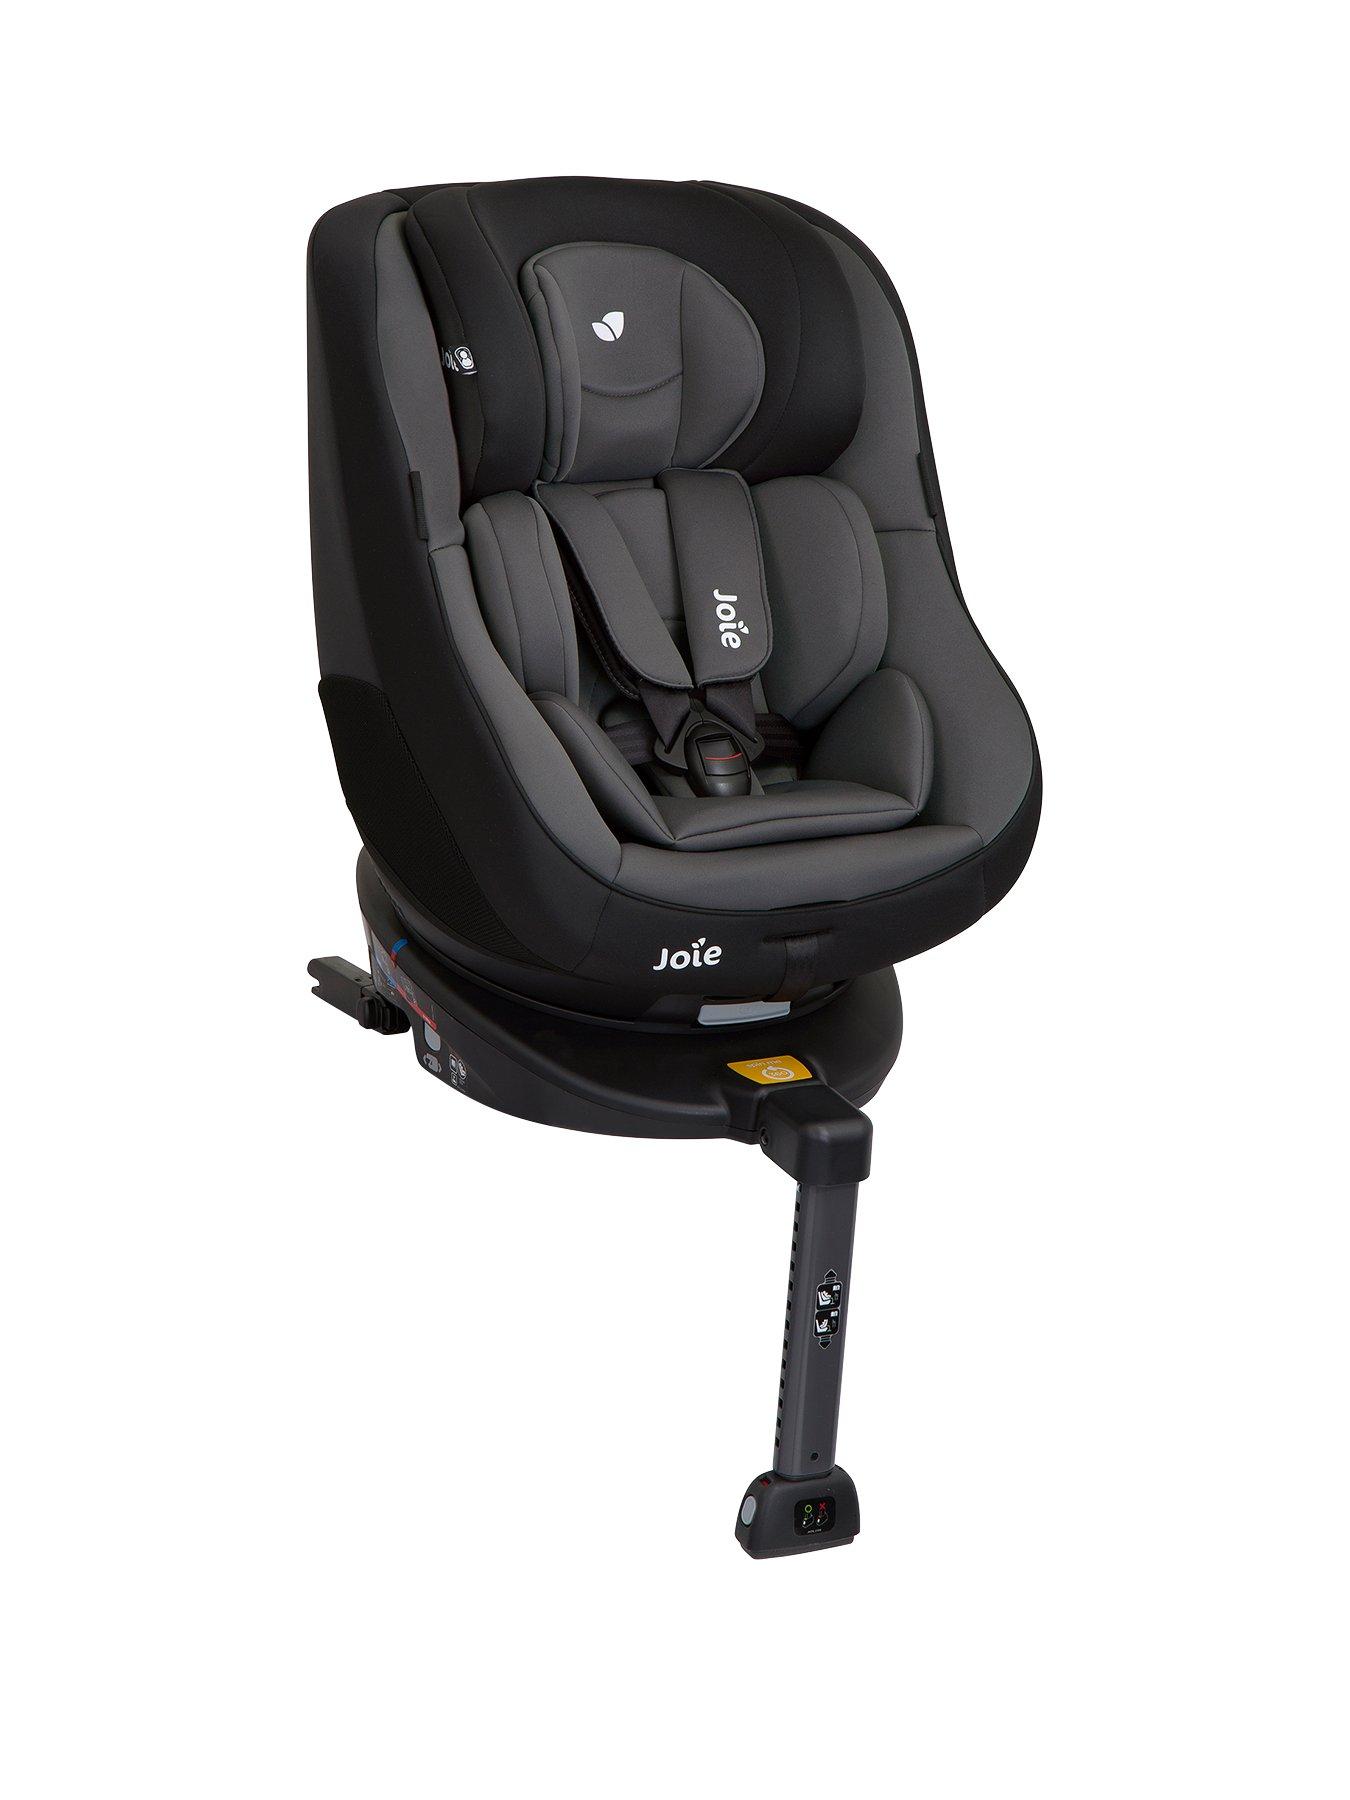 joie every stage car seat smyths